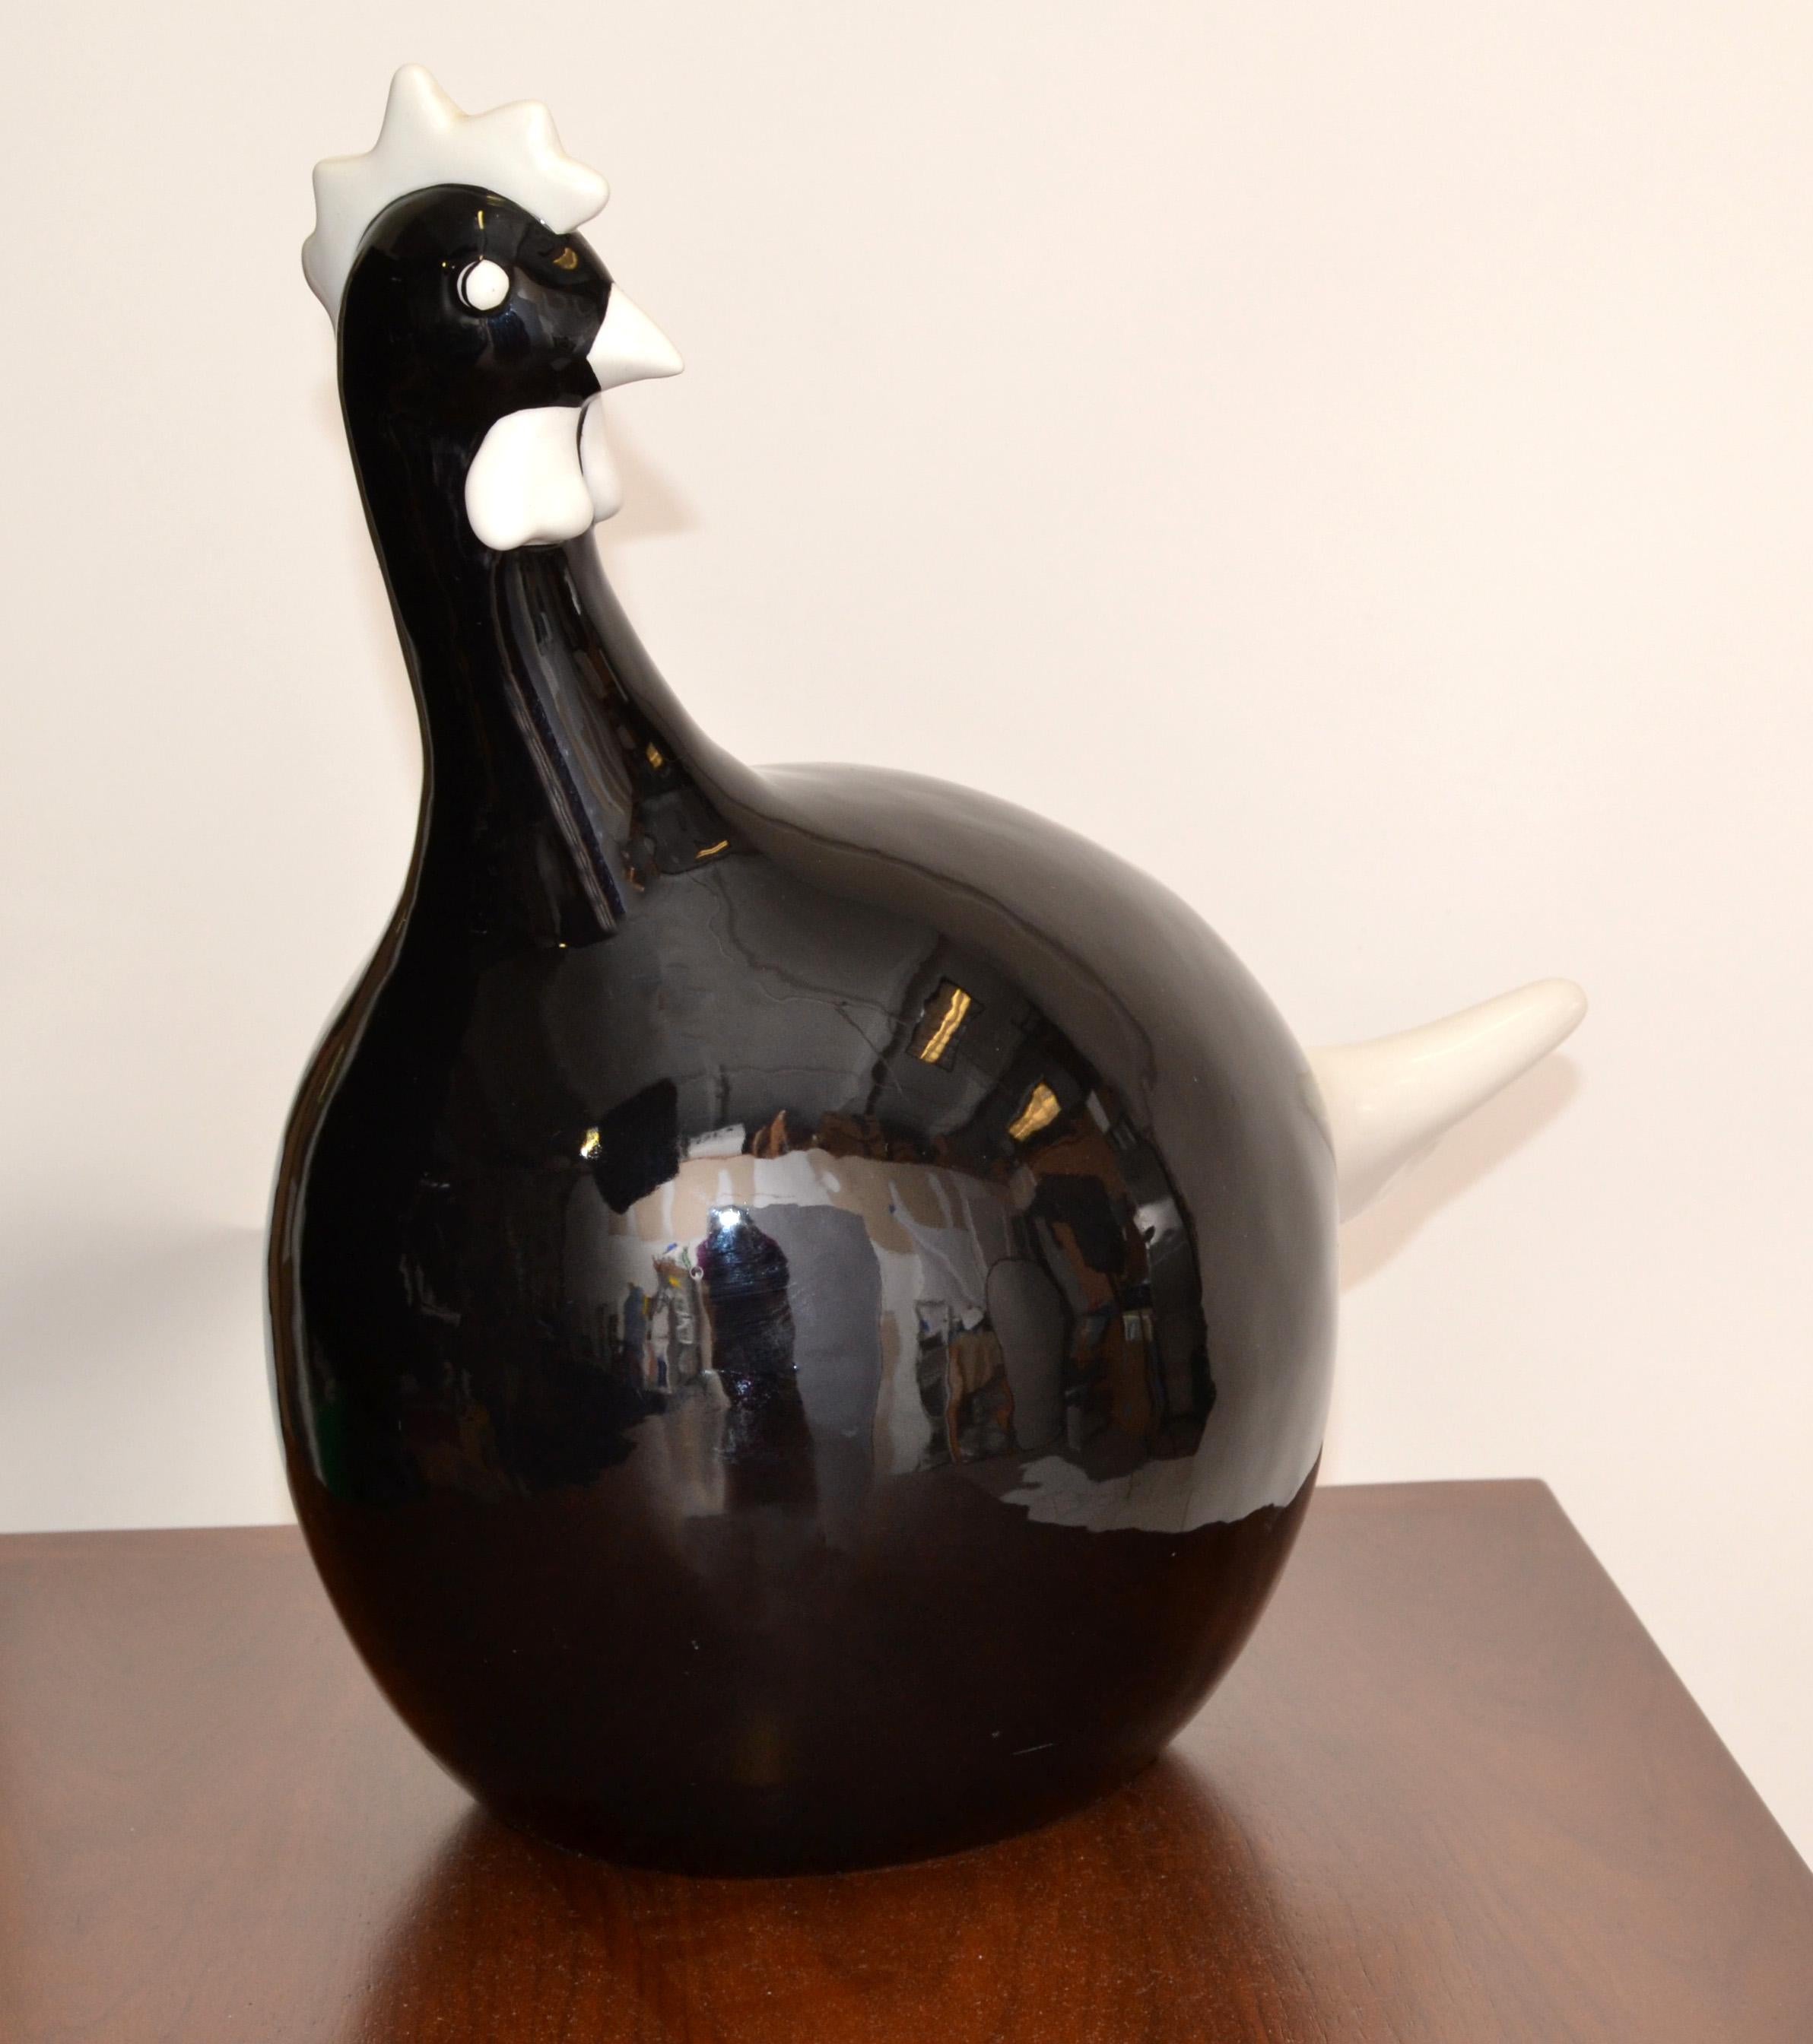 Scandinavian Modern Iittala style black and white glazed ceramic chicken, handmade in the USA.
Life-size stylized chicken animal sculpture for any interior design.
 